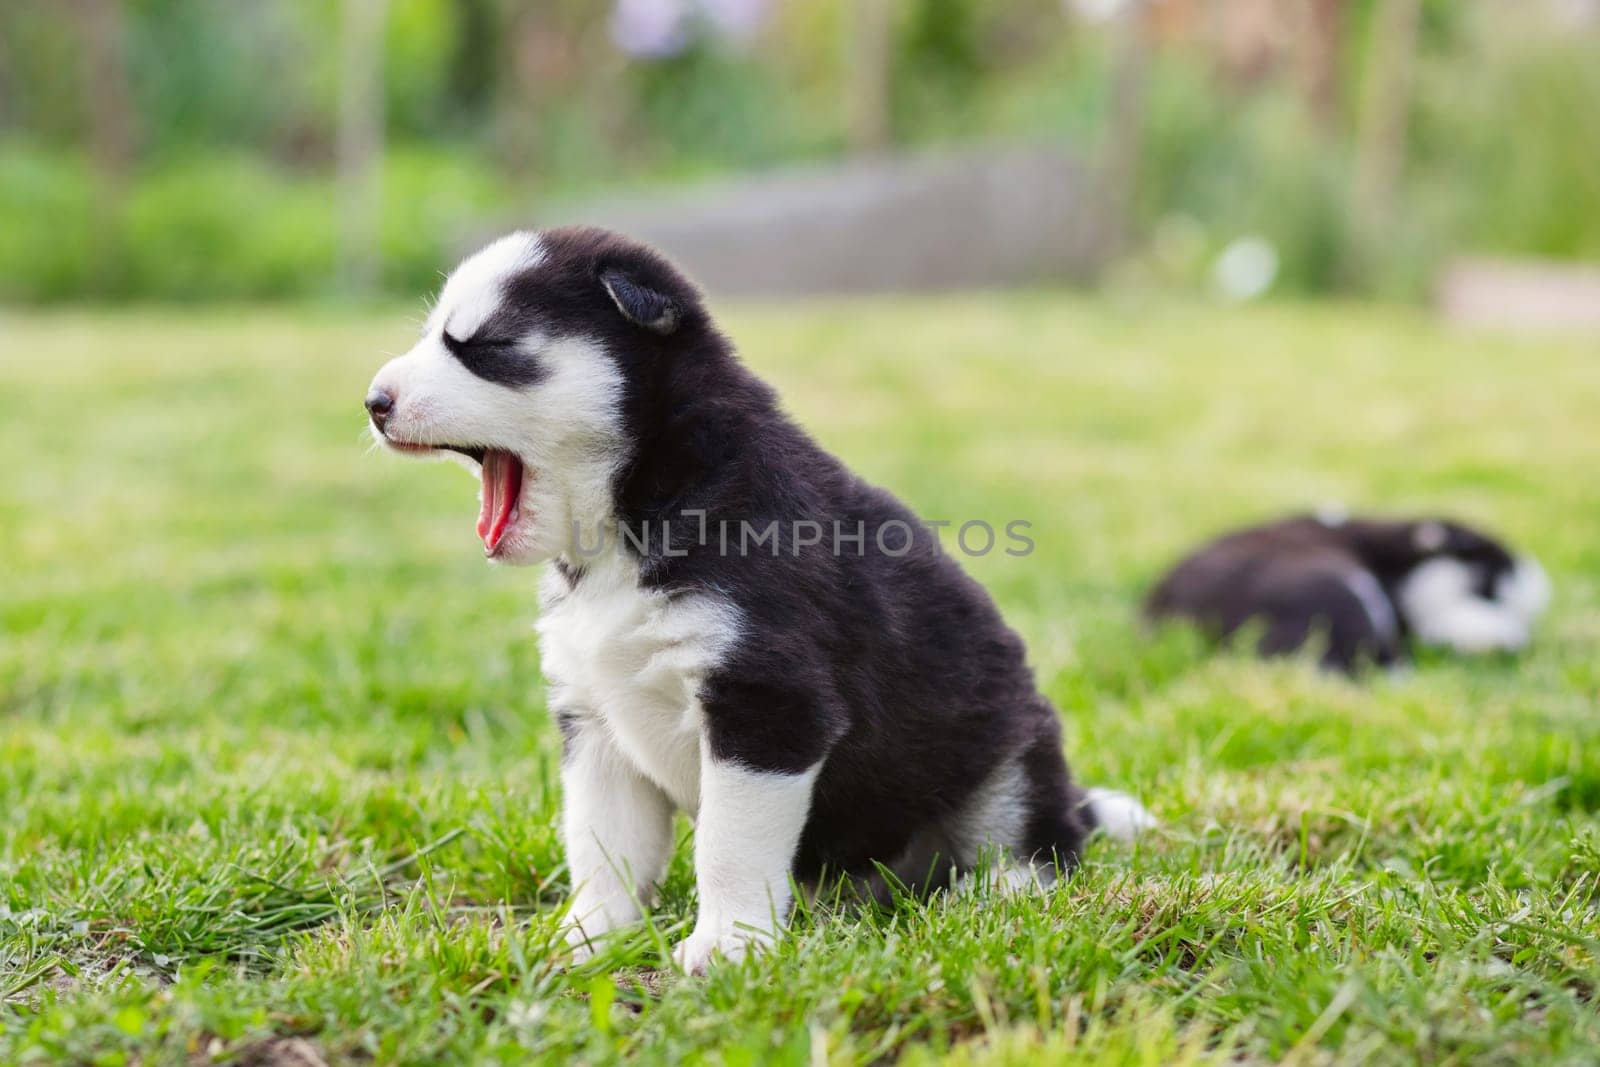 Cute siberian husky puppy with blue eyes sitting in green grass on a summer day.